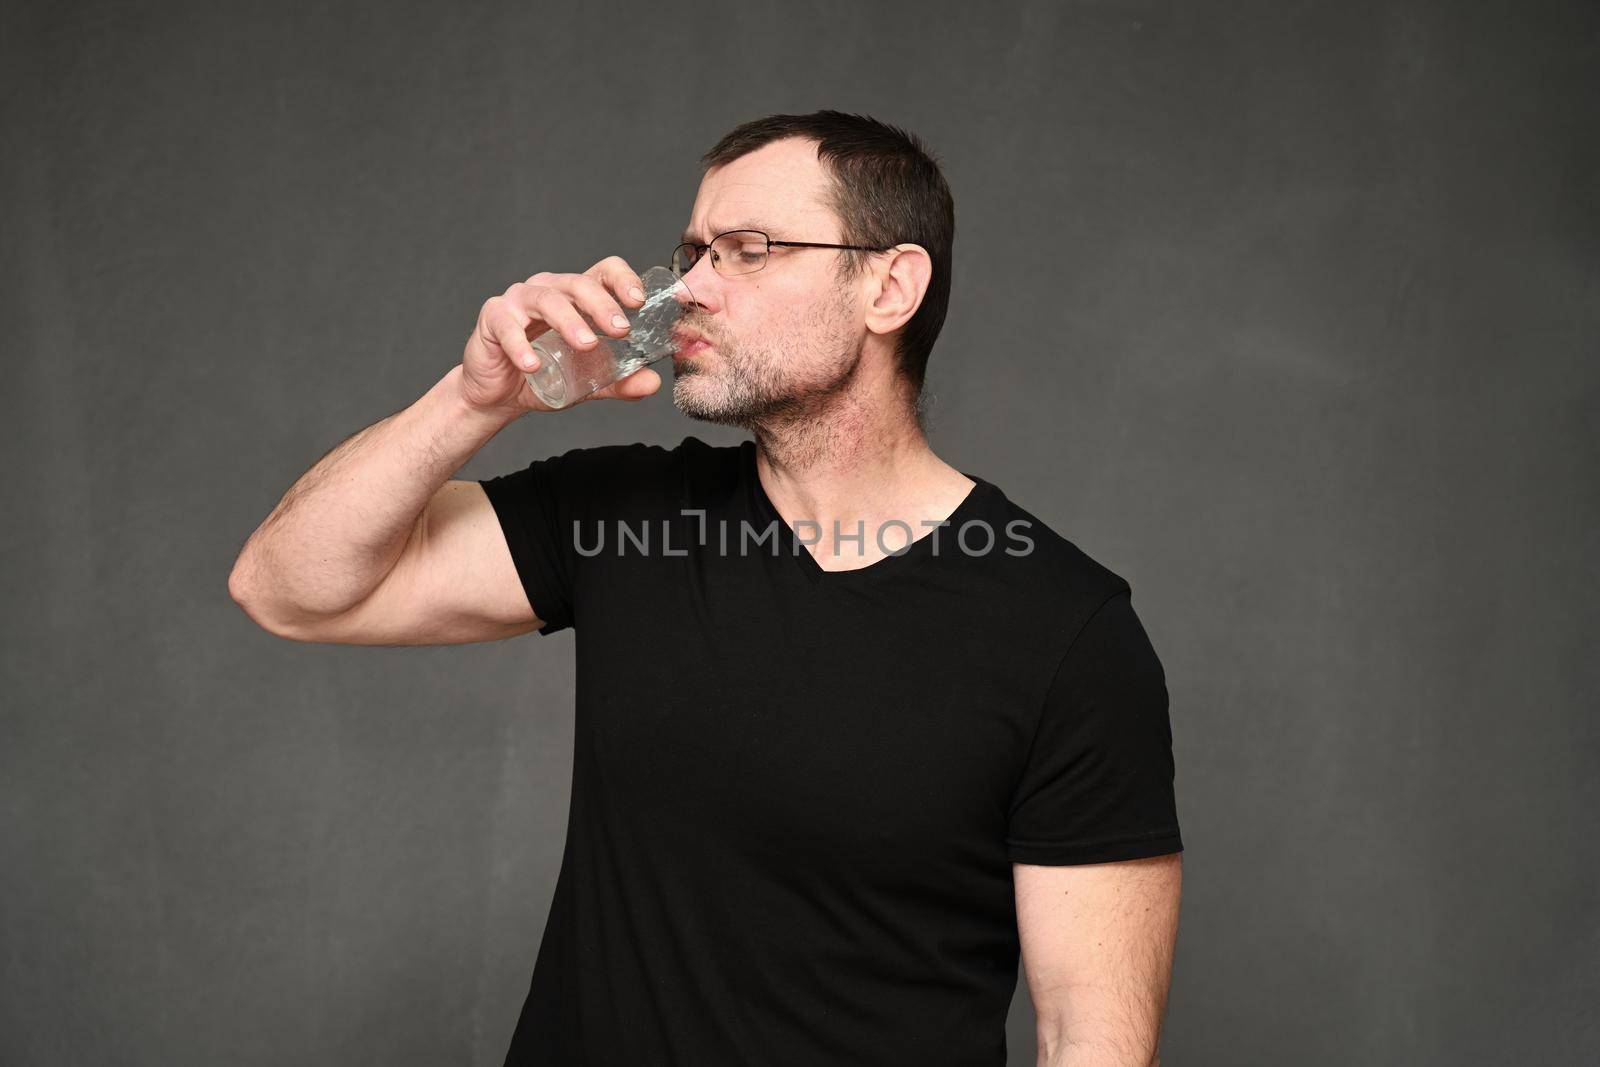 Middle-aged man in a black T-shirt and glasses drinking water from a glass